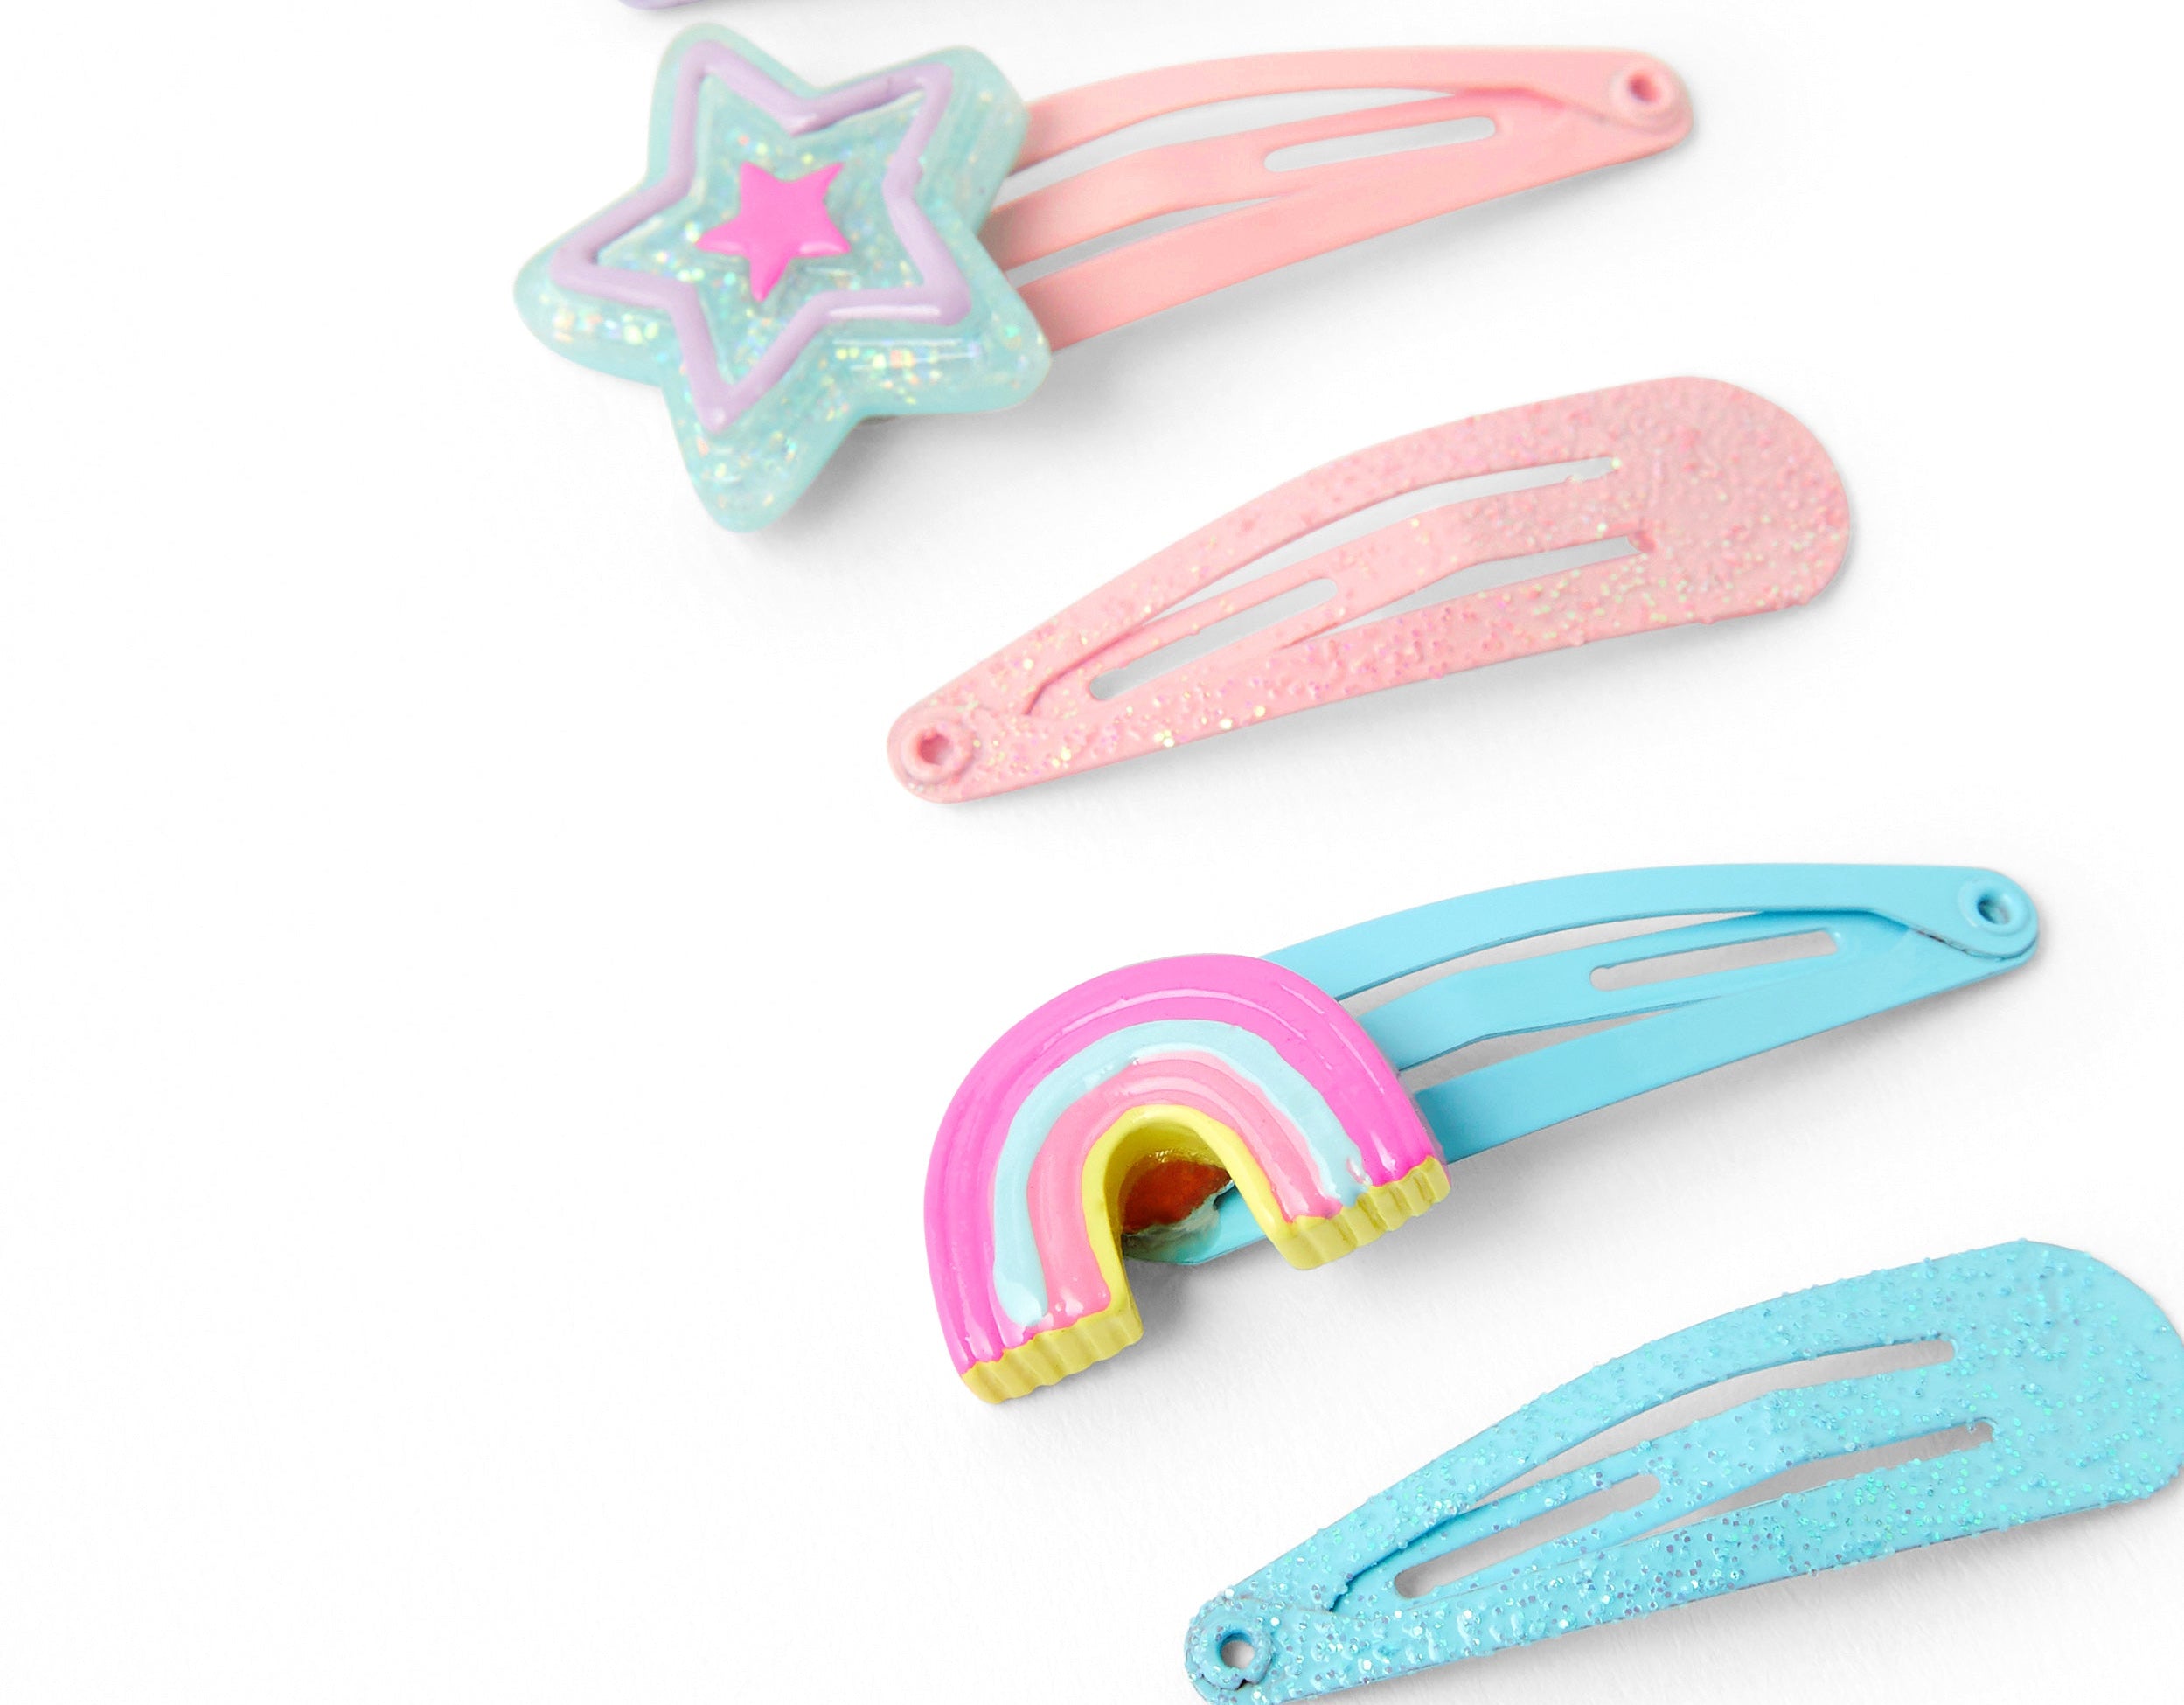 Accessorize London Pack Of 6 Unicorn Clic Clacs Hair Clips